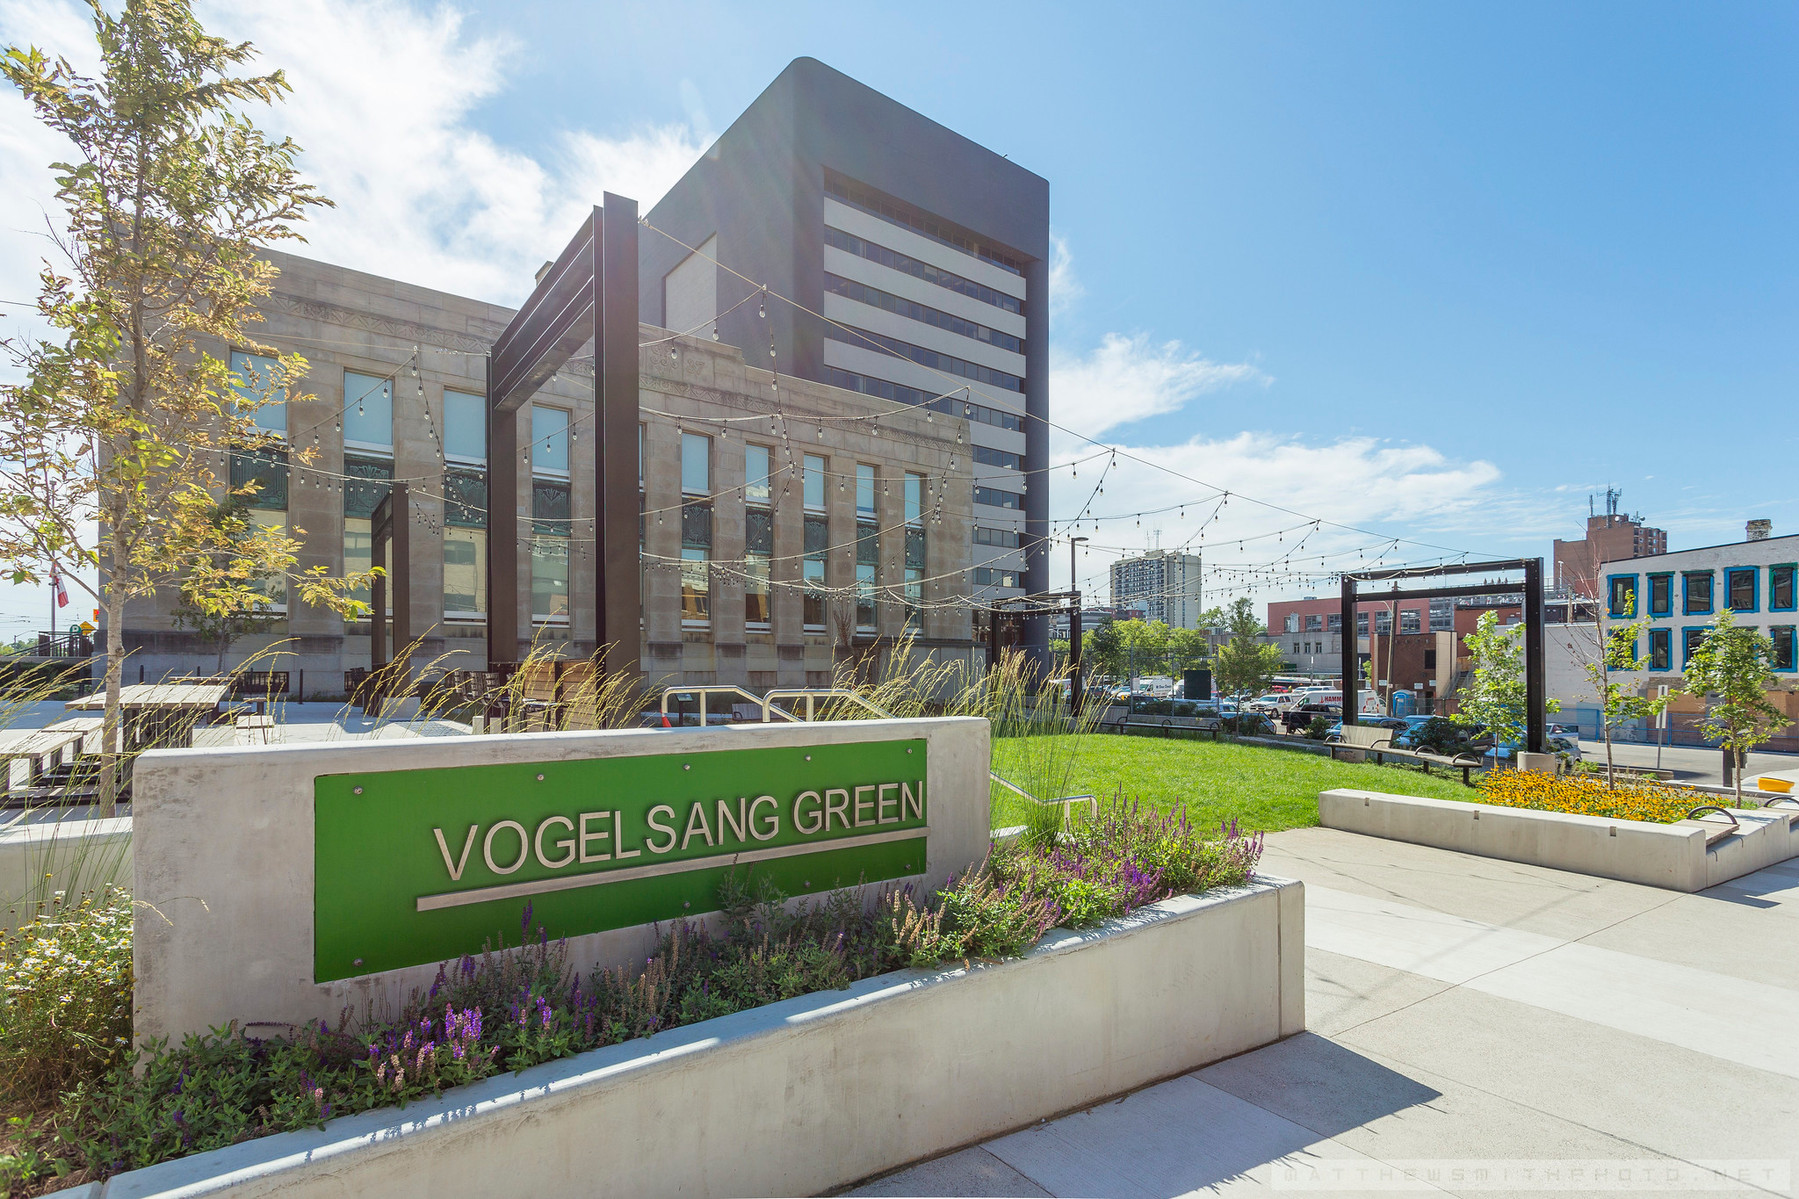 New urban park in Downtown Kitchener, Vogelsang Green. 